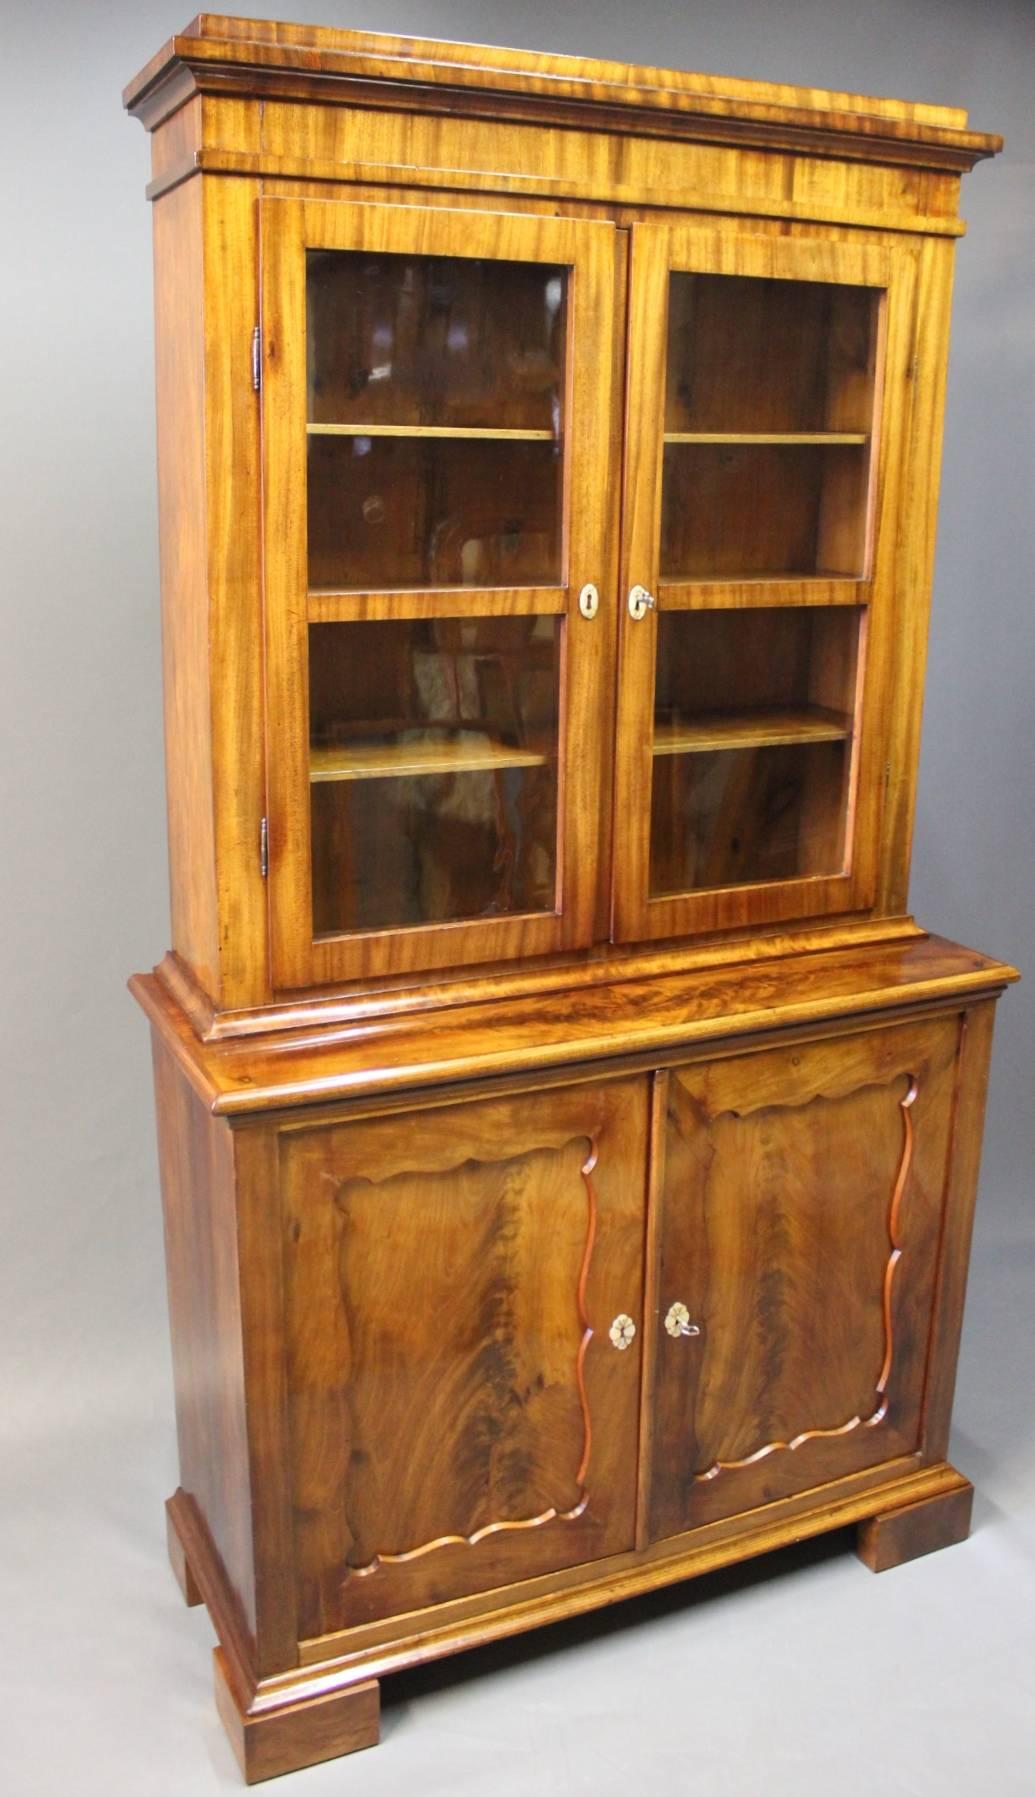 Large glass cabinet in mahogany in the style of late Empire from the 1830s. The cabinet has recently been fully restored and is now in perfect condition.